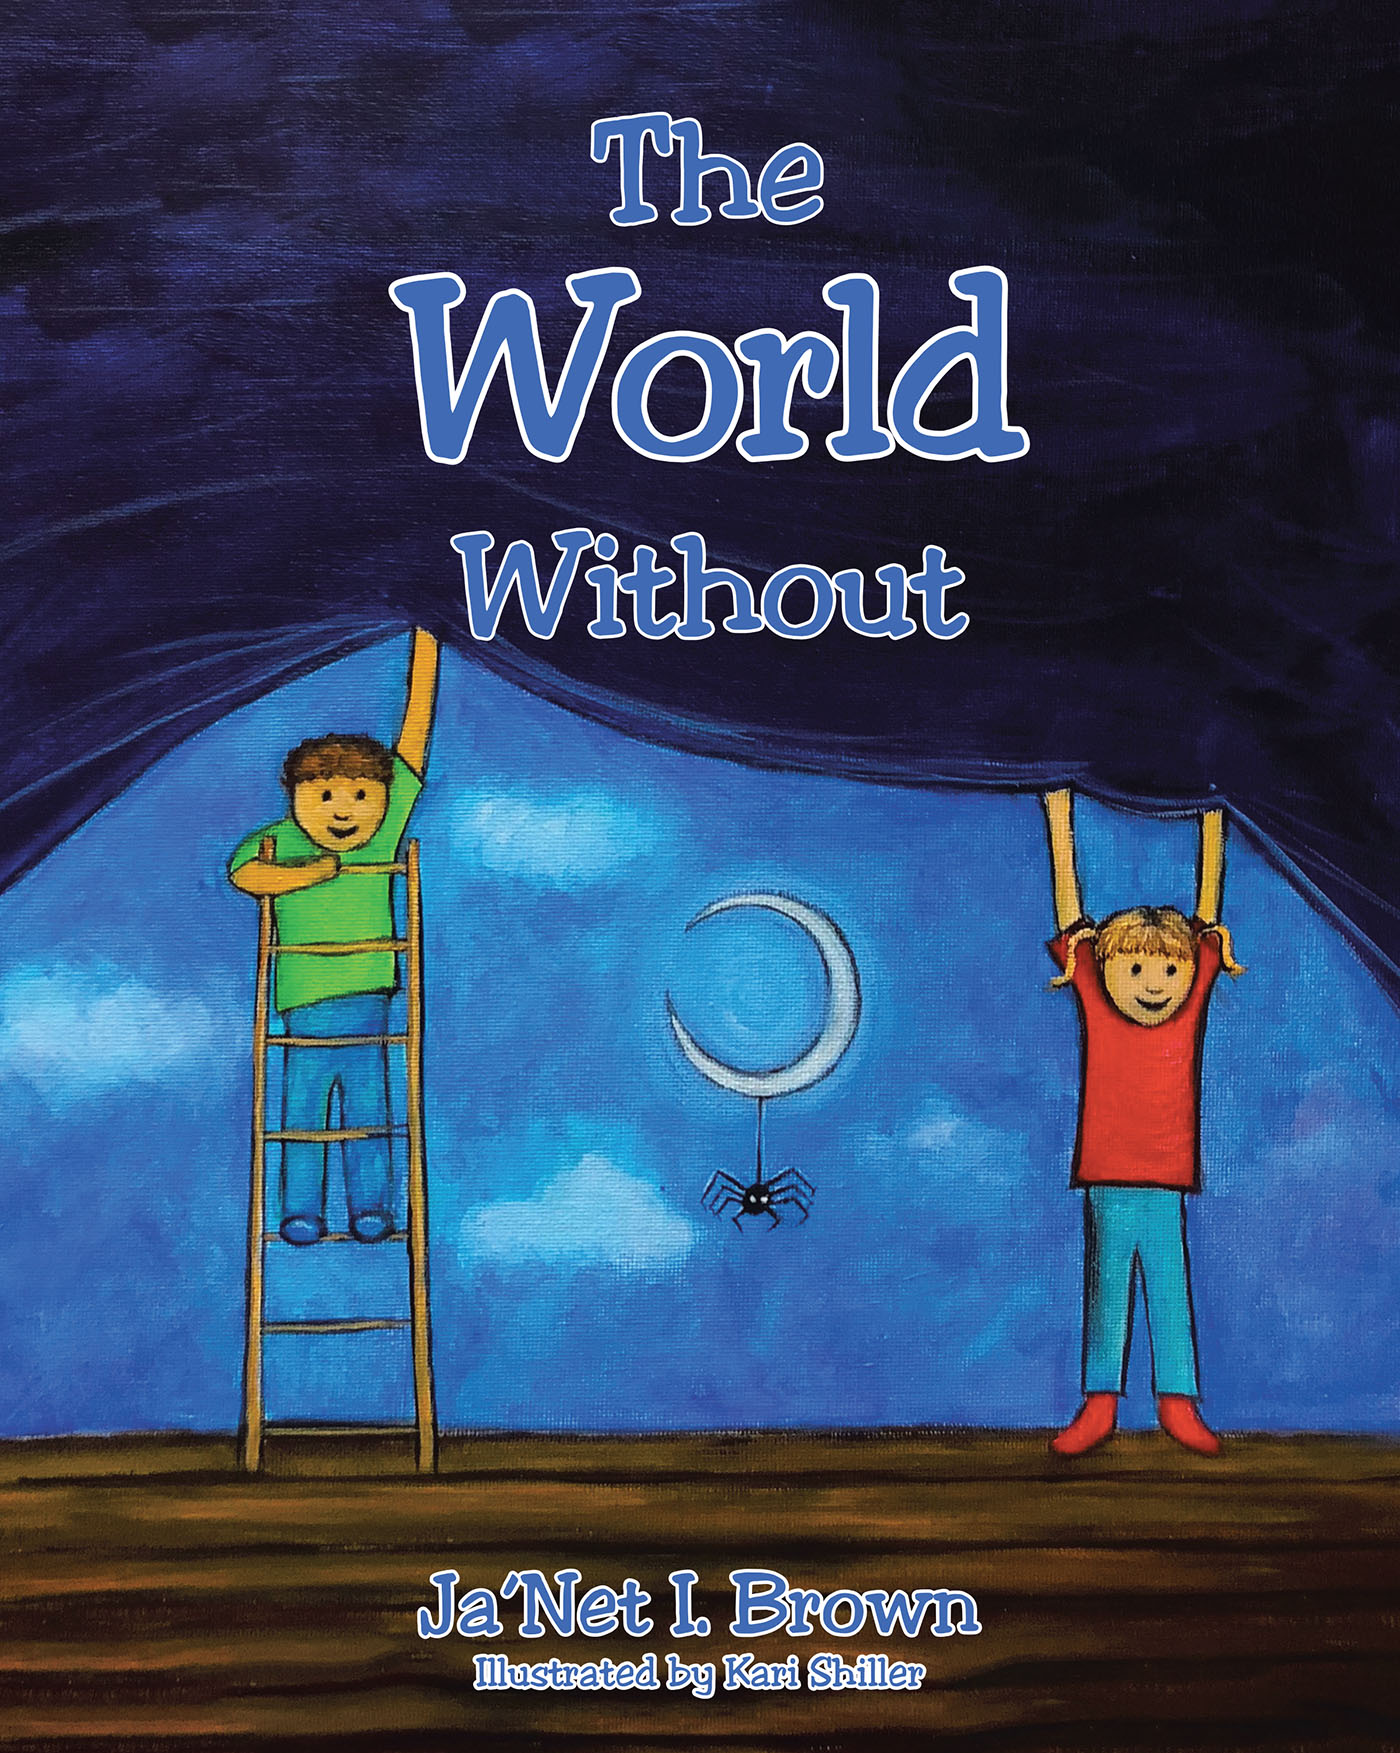 Ja’Net I. Brown’s Newly Released “The World Without” is an Informative Narrative That Explores the Importance of Various Creatures in the Environment